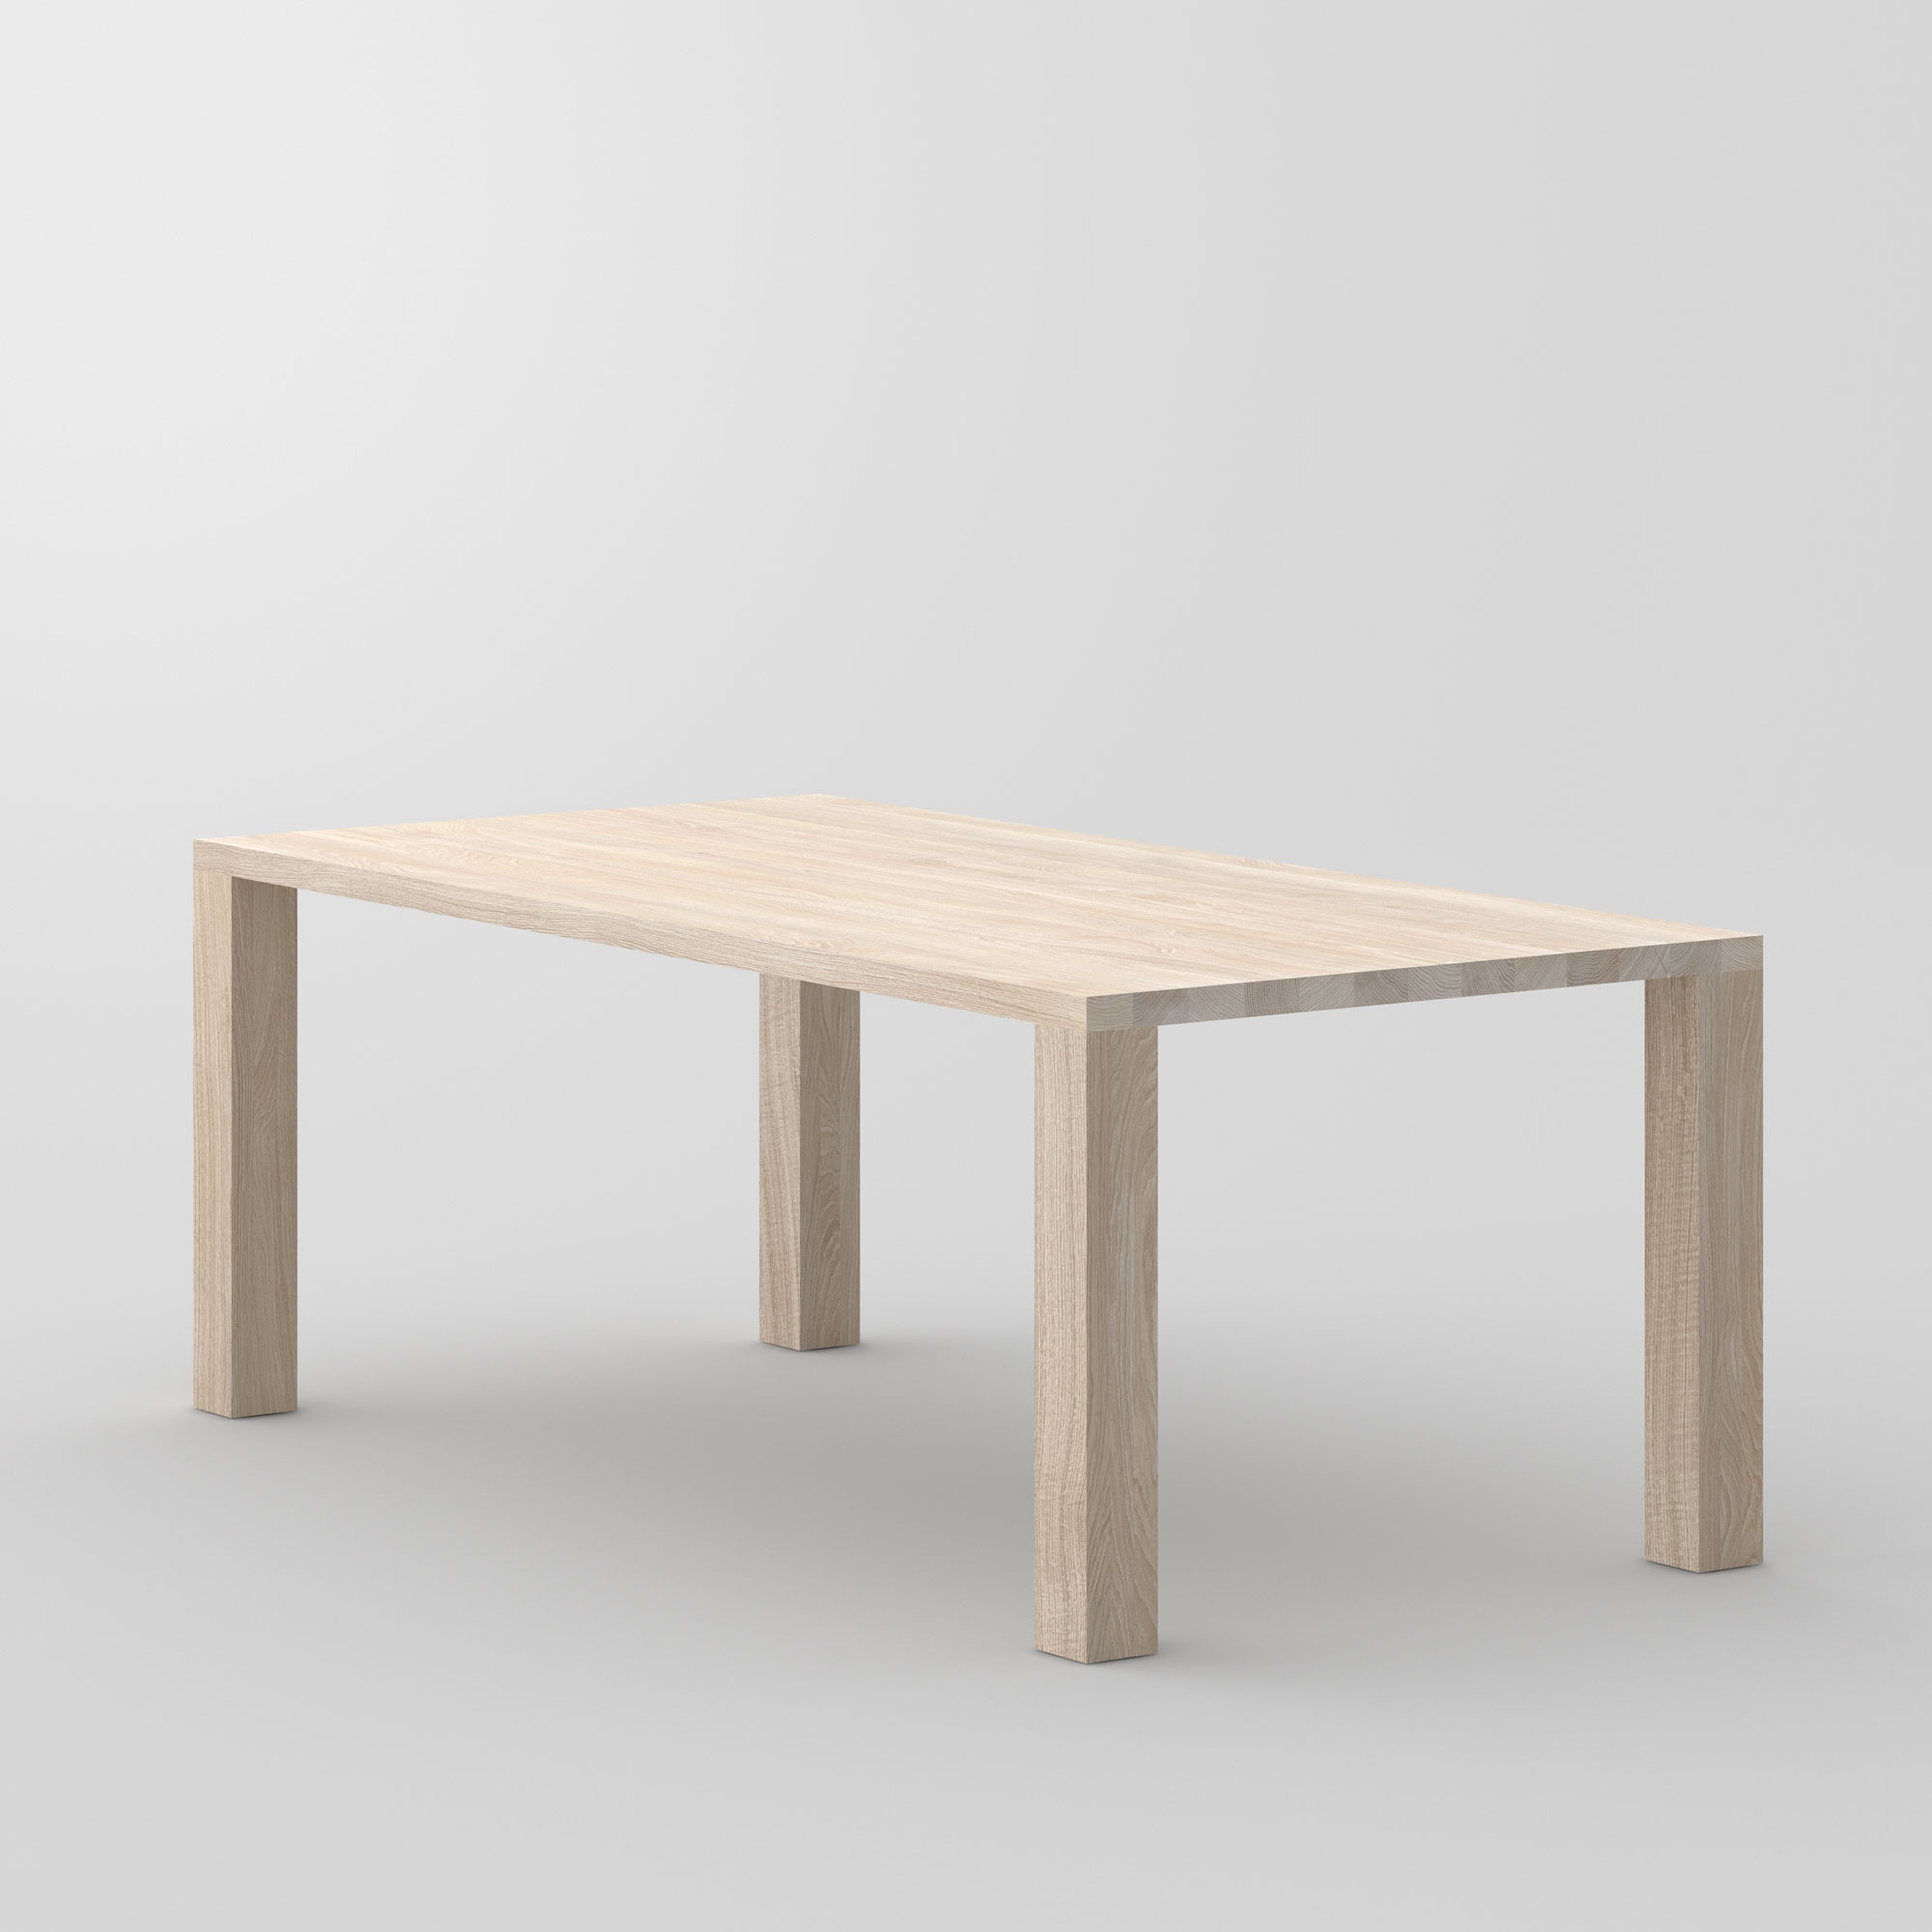 Frameless Solid Wood Table IUSTUS cam3 custom made in solid wood by vitamin design